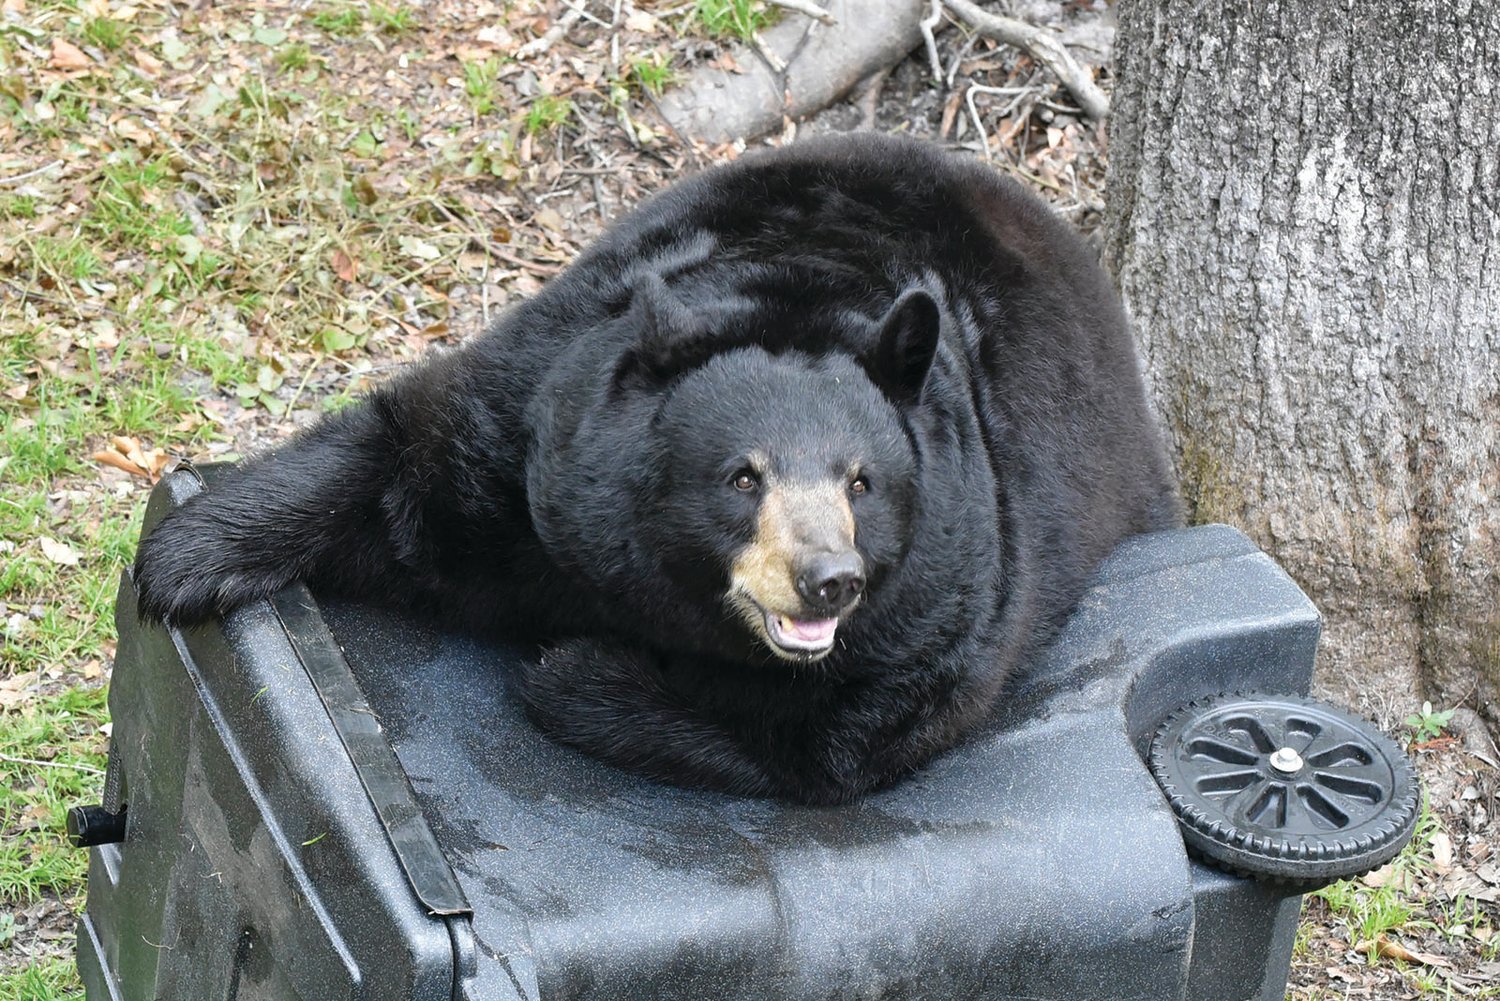 Florida Black Bear on a garbage can.